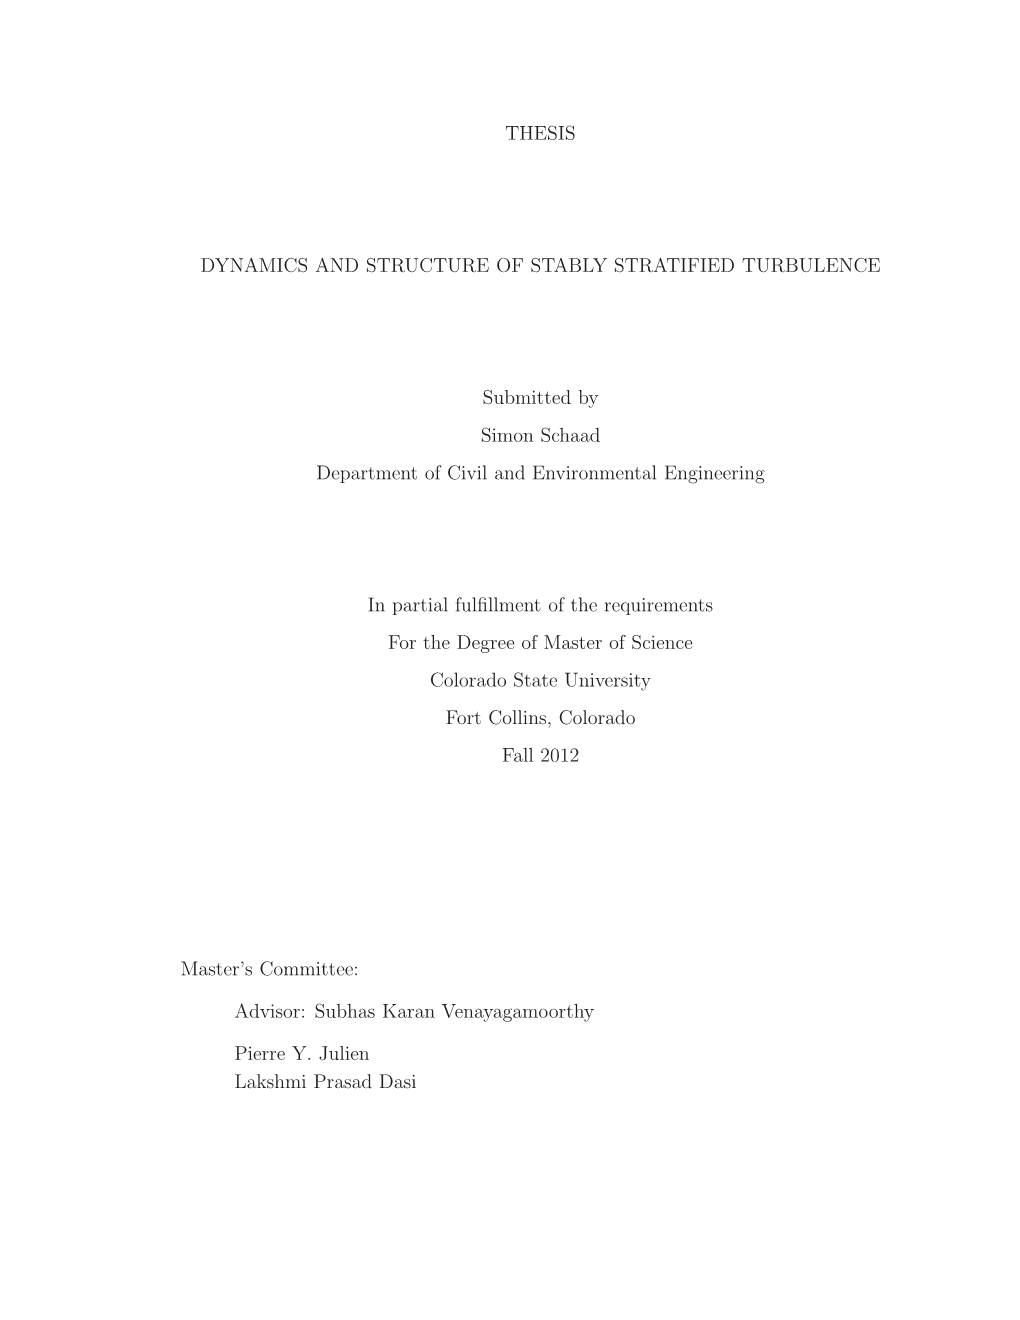 Thesis Dynamics and Structure of Stably